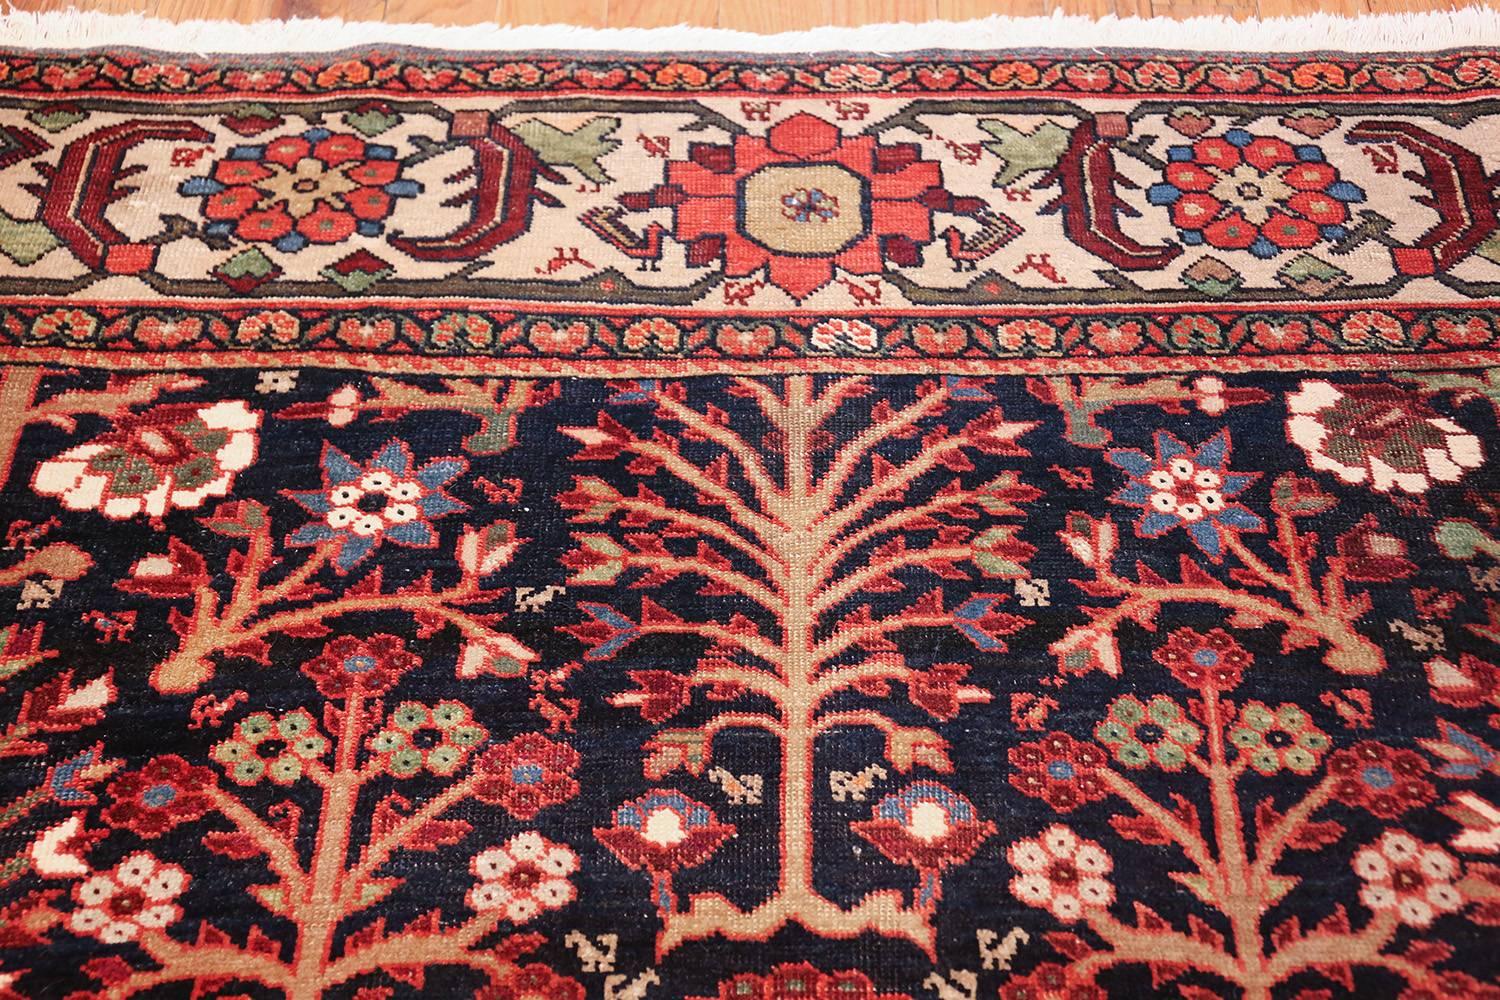 Tree of Life Antique Sarouk Farahan Persian rug 49527, country of origin / rug type: Persian rug, date circa 1920

Sarouk rugs– The thickness of the luxurious pile allows Sarouk rugs to withstand the level of foot traffic that would be typical in